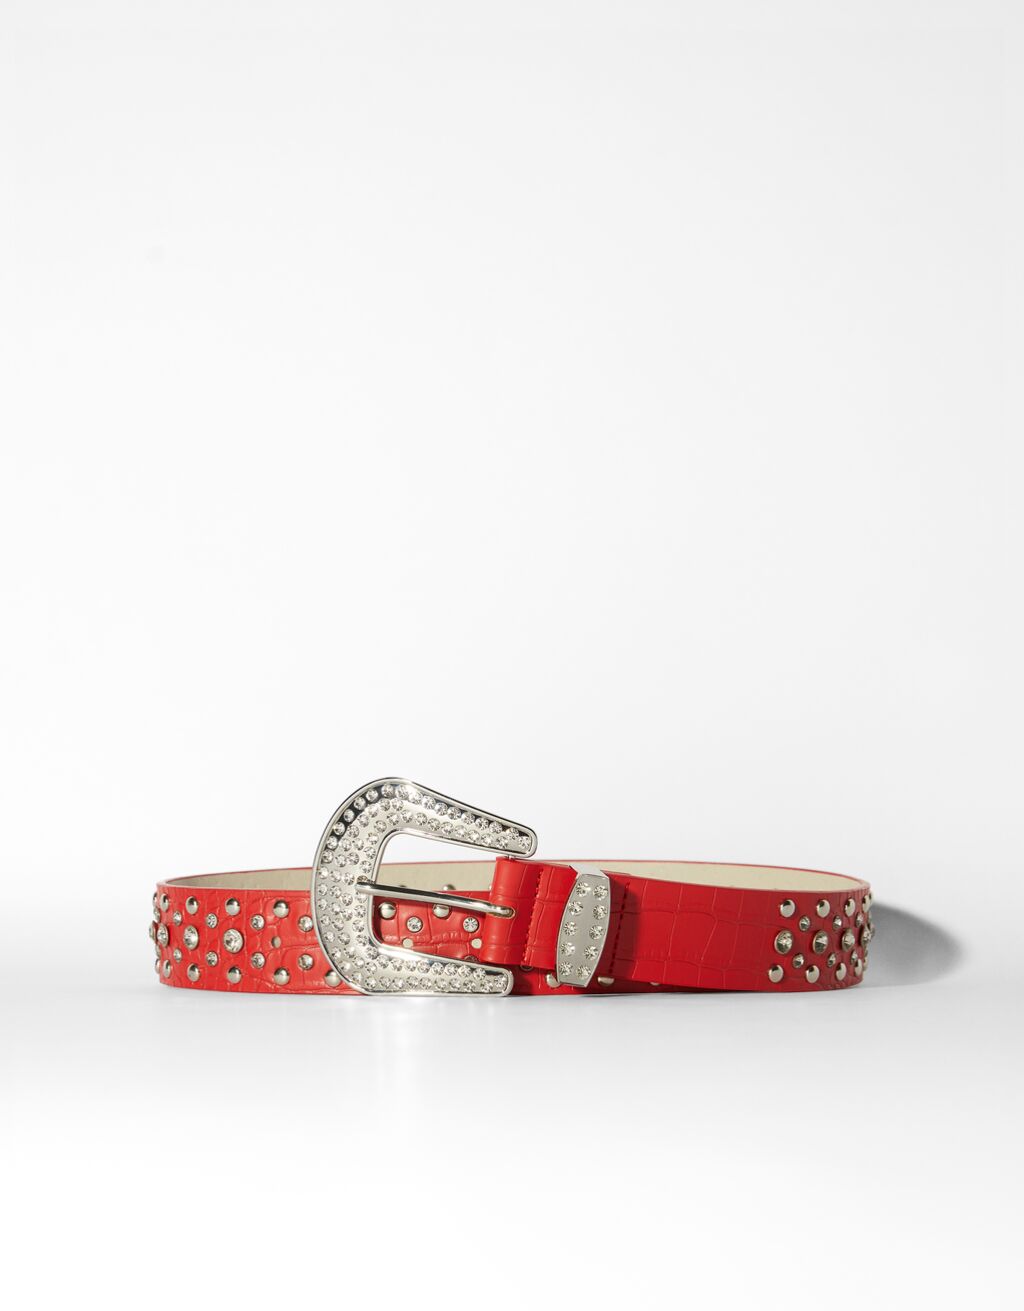 Cowboy belt with bejeweled studs